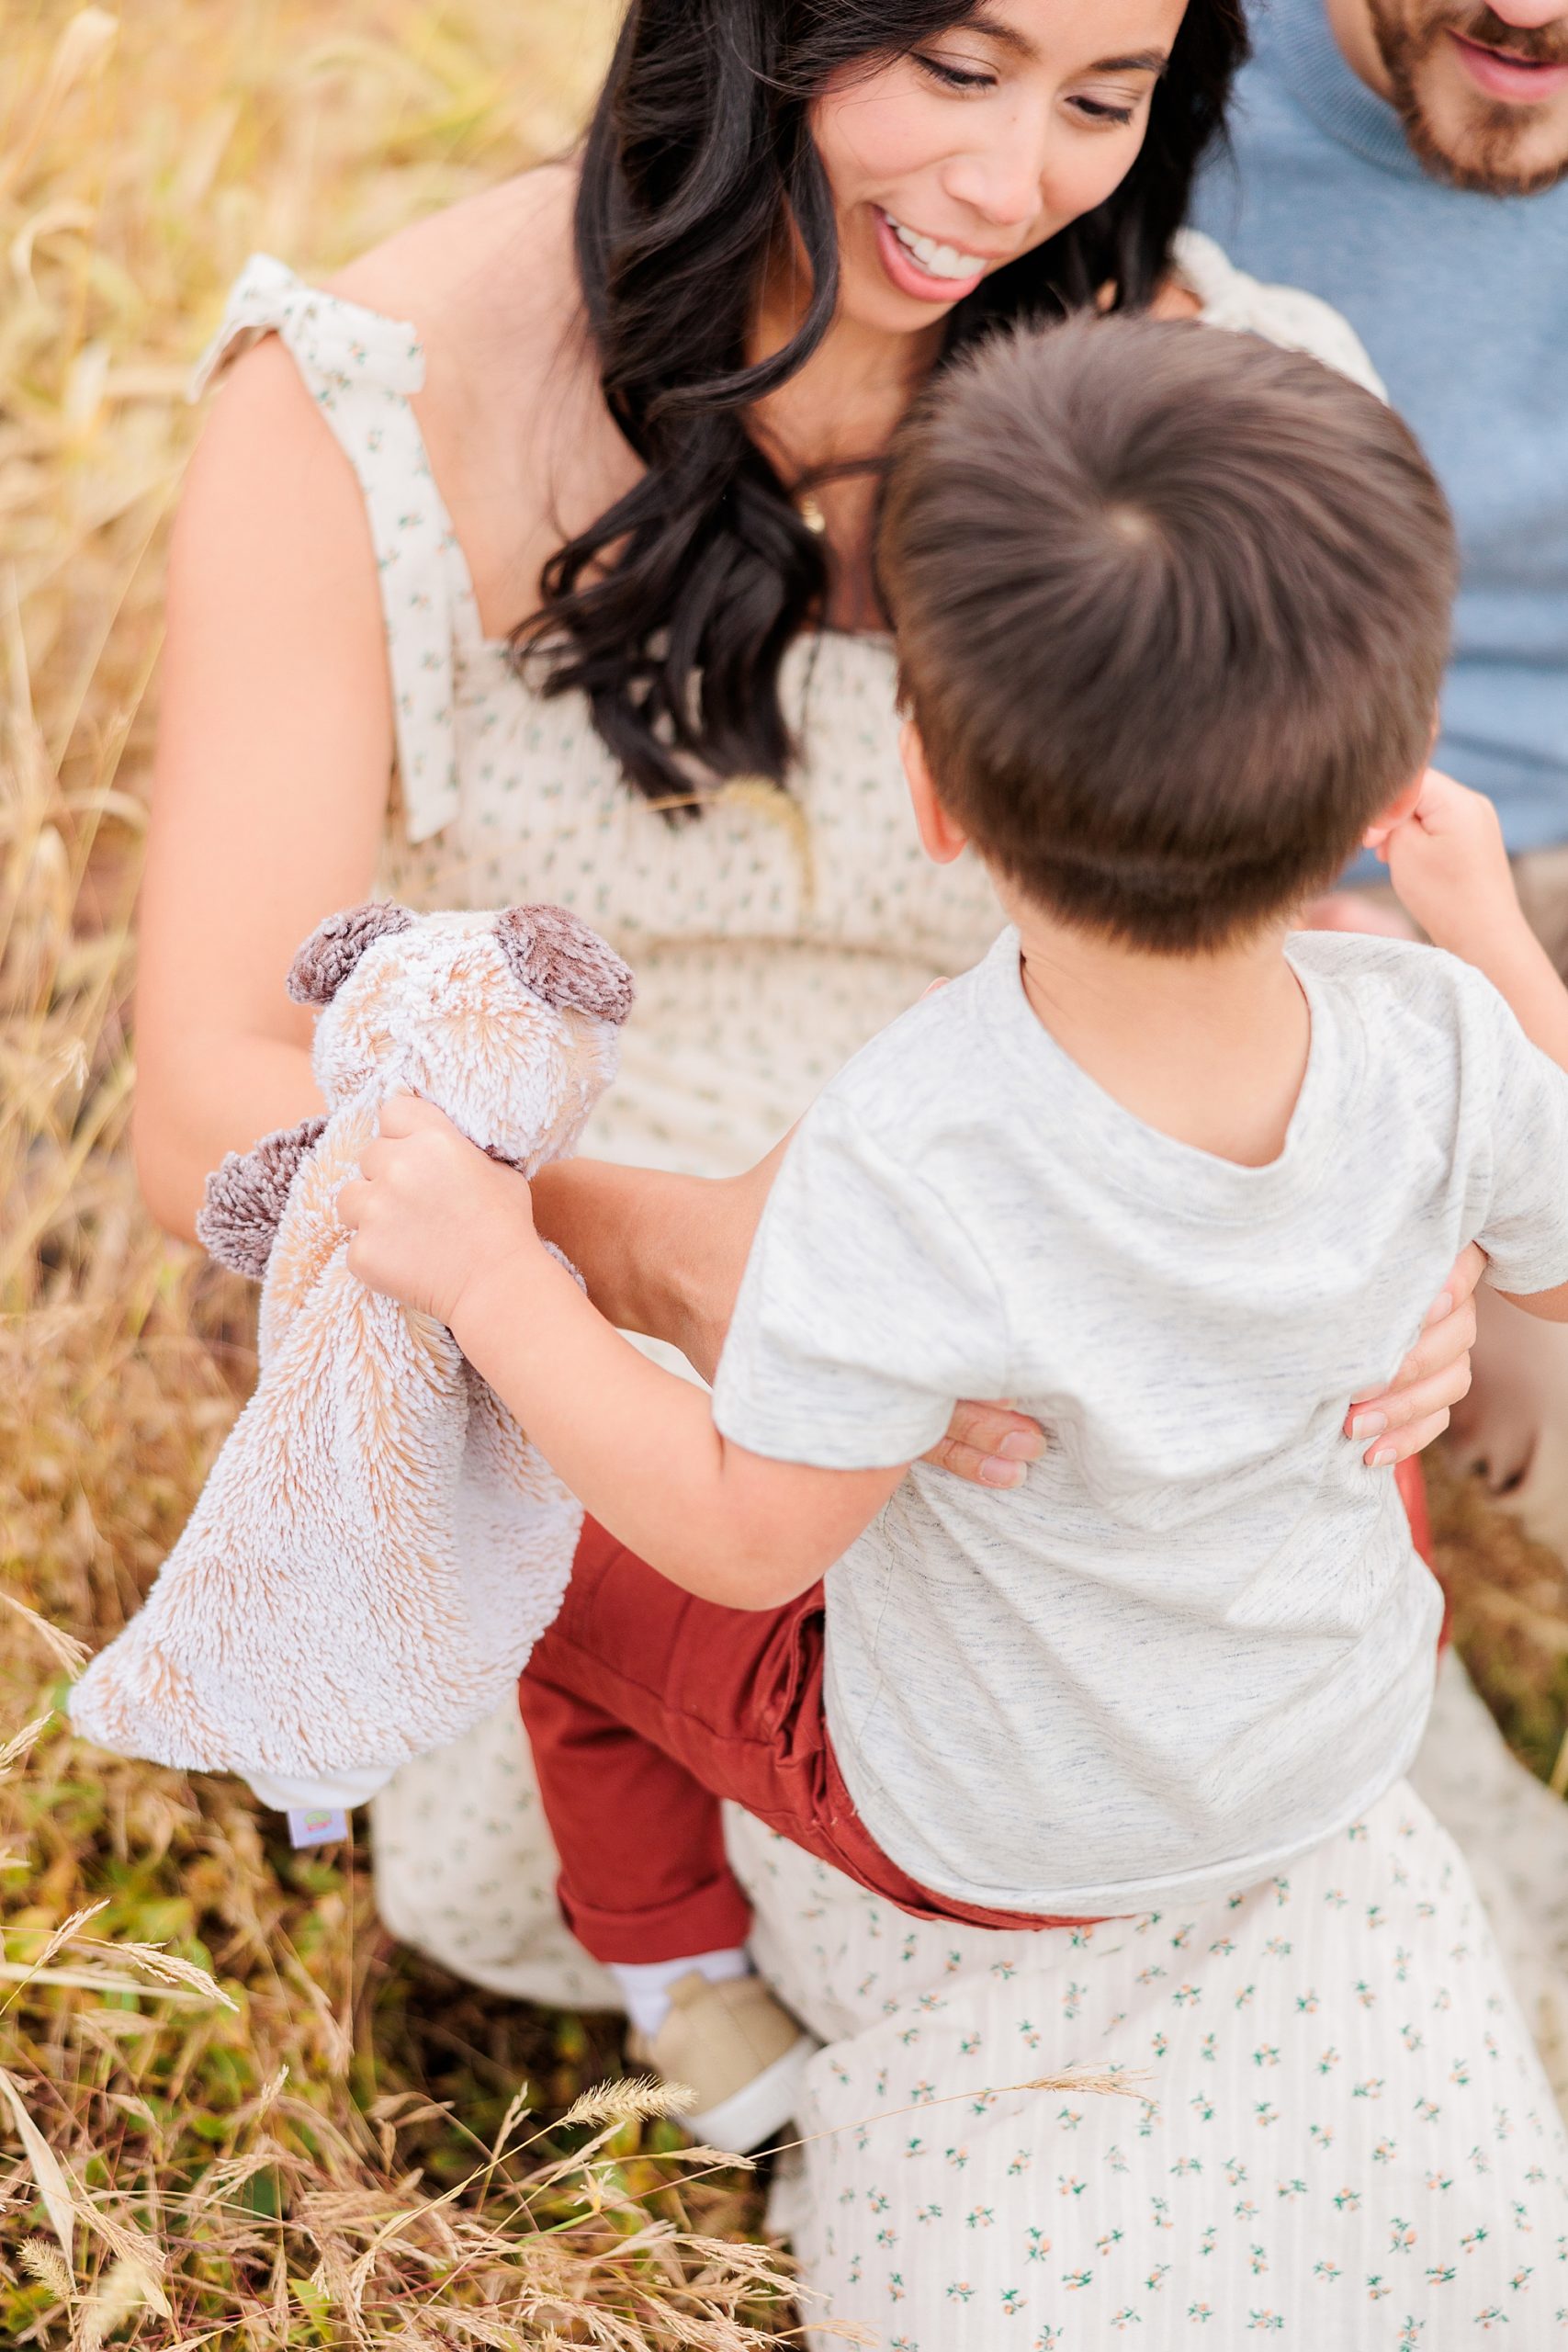 How to Make Your Child More Comfortable for Family Portraits: tips from DMV family photographer Christina Tundo Photography